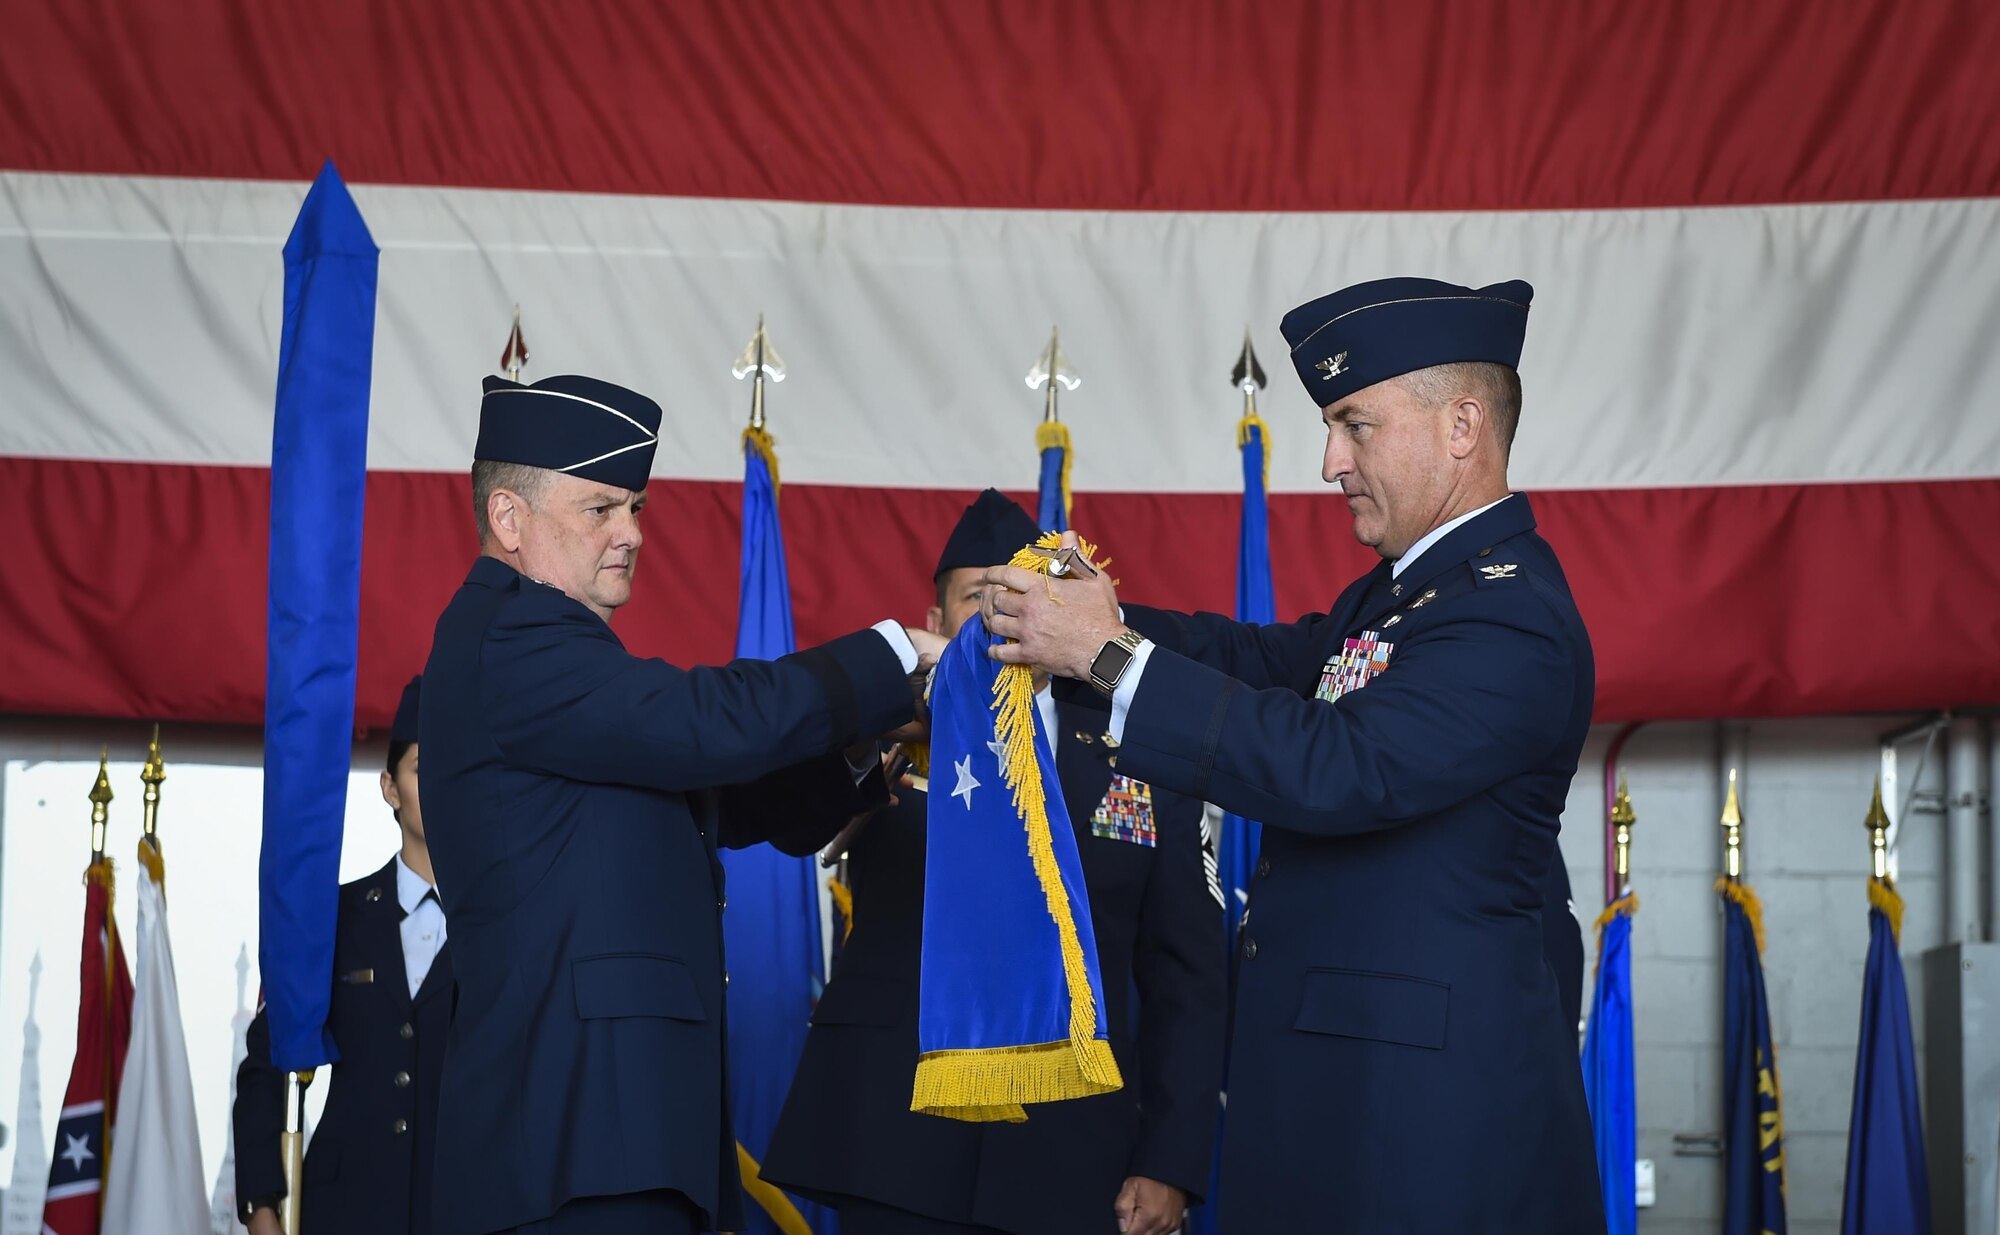 Lt. Gen. Brad Webb, left, the commander of Air Force Special Operations Command, and Col. Nathan Green, right, the commander of Air Force Special Operations Air Warfare Center,  furl the AFSOAWC flag during a ceremony at Hurlburt Field, May 10, 2017. An organizational banner is ceremoniously furled to designate a unit’s inactivation. (U.S. Air Force photo by Airman 1st Class Joseph Pick)